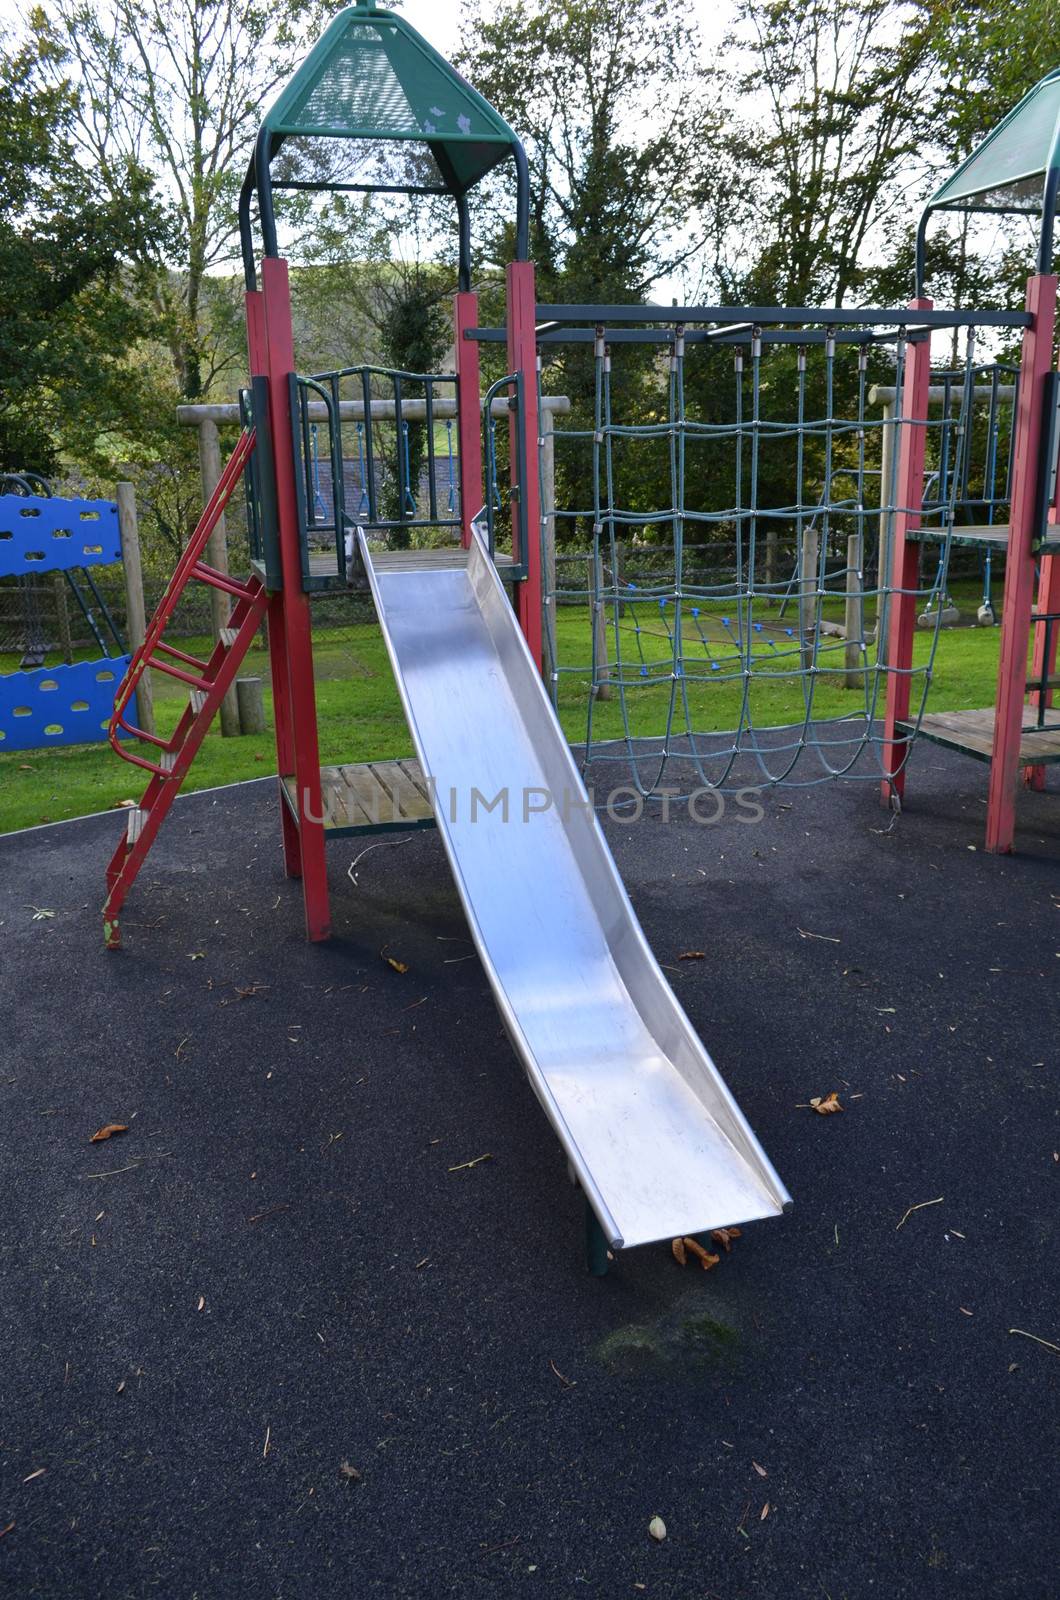 Playground slide. by bunsview